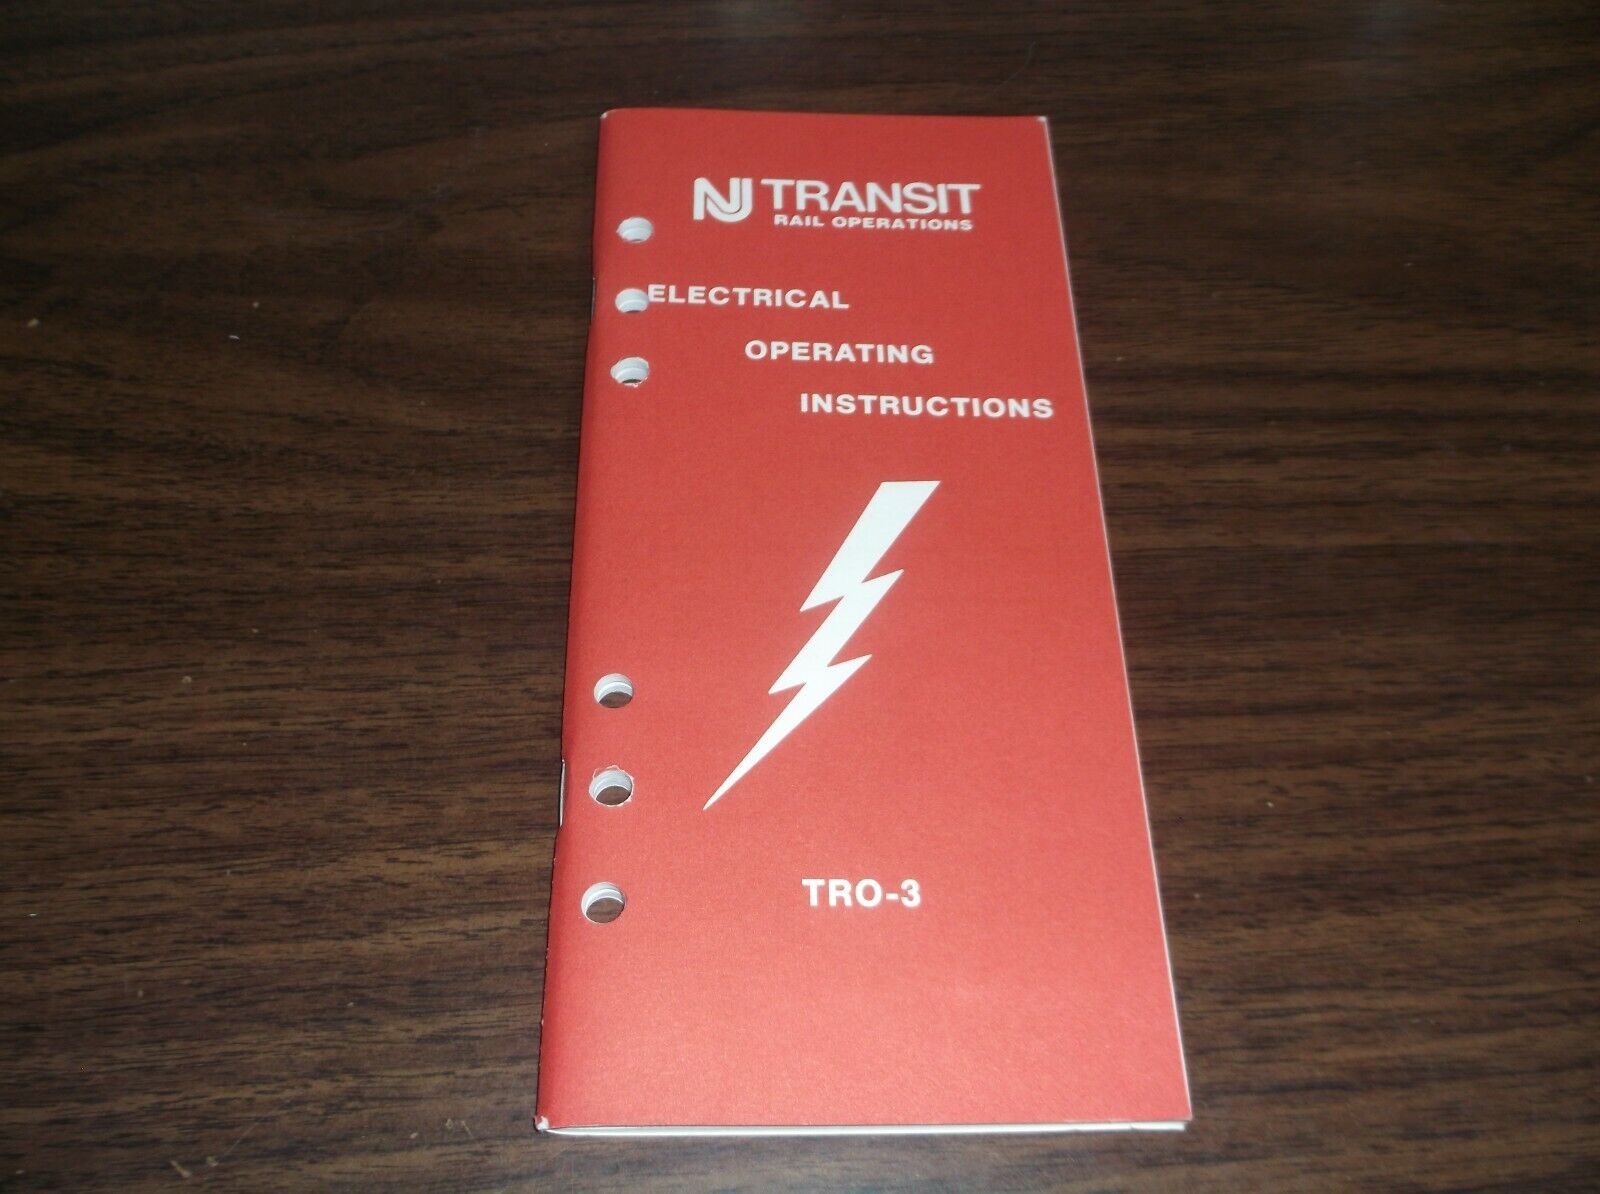 1991 NJT NEW JERSEY TRANSIT RAIL TRO-3 ELECTRICAL OPERATING INSTRUCTIONS